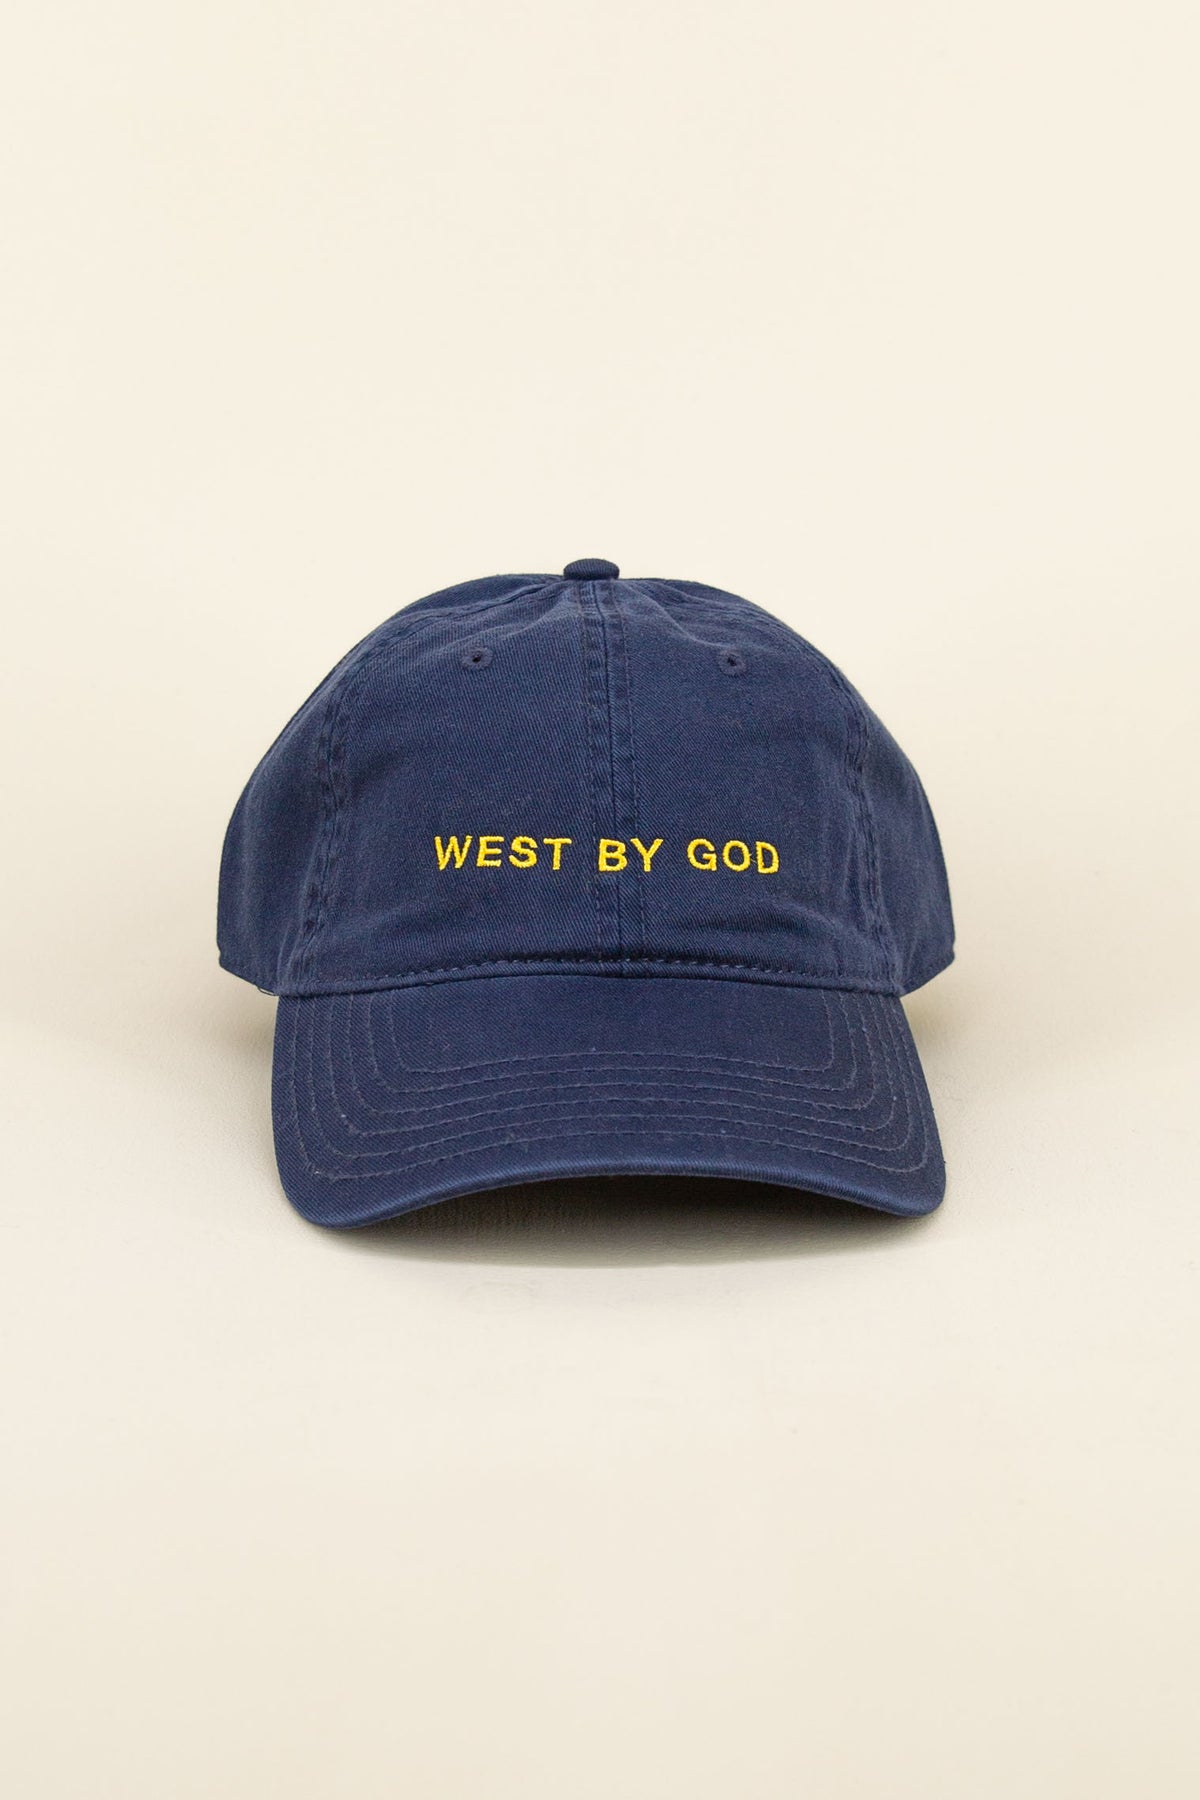 west by god hat, navy